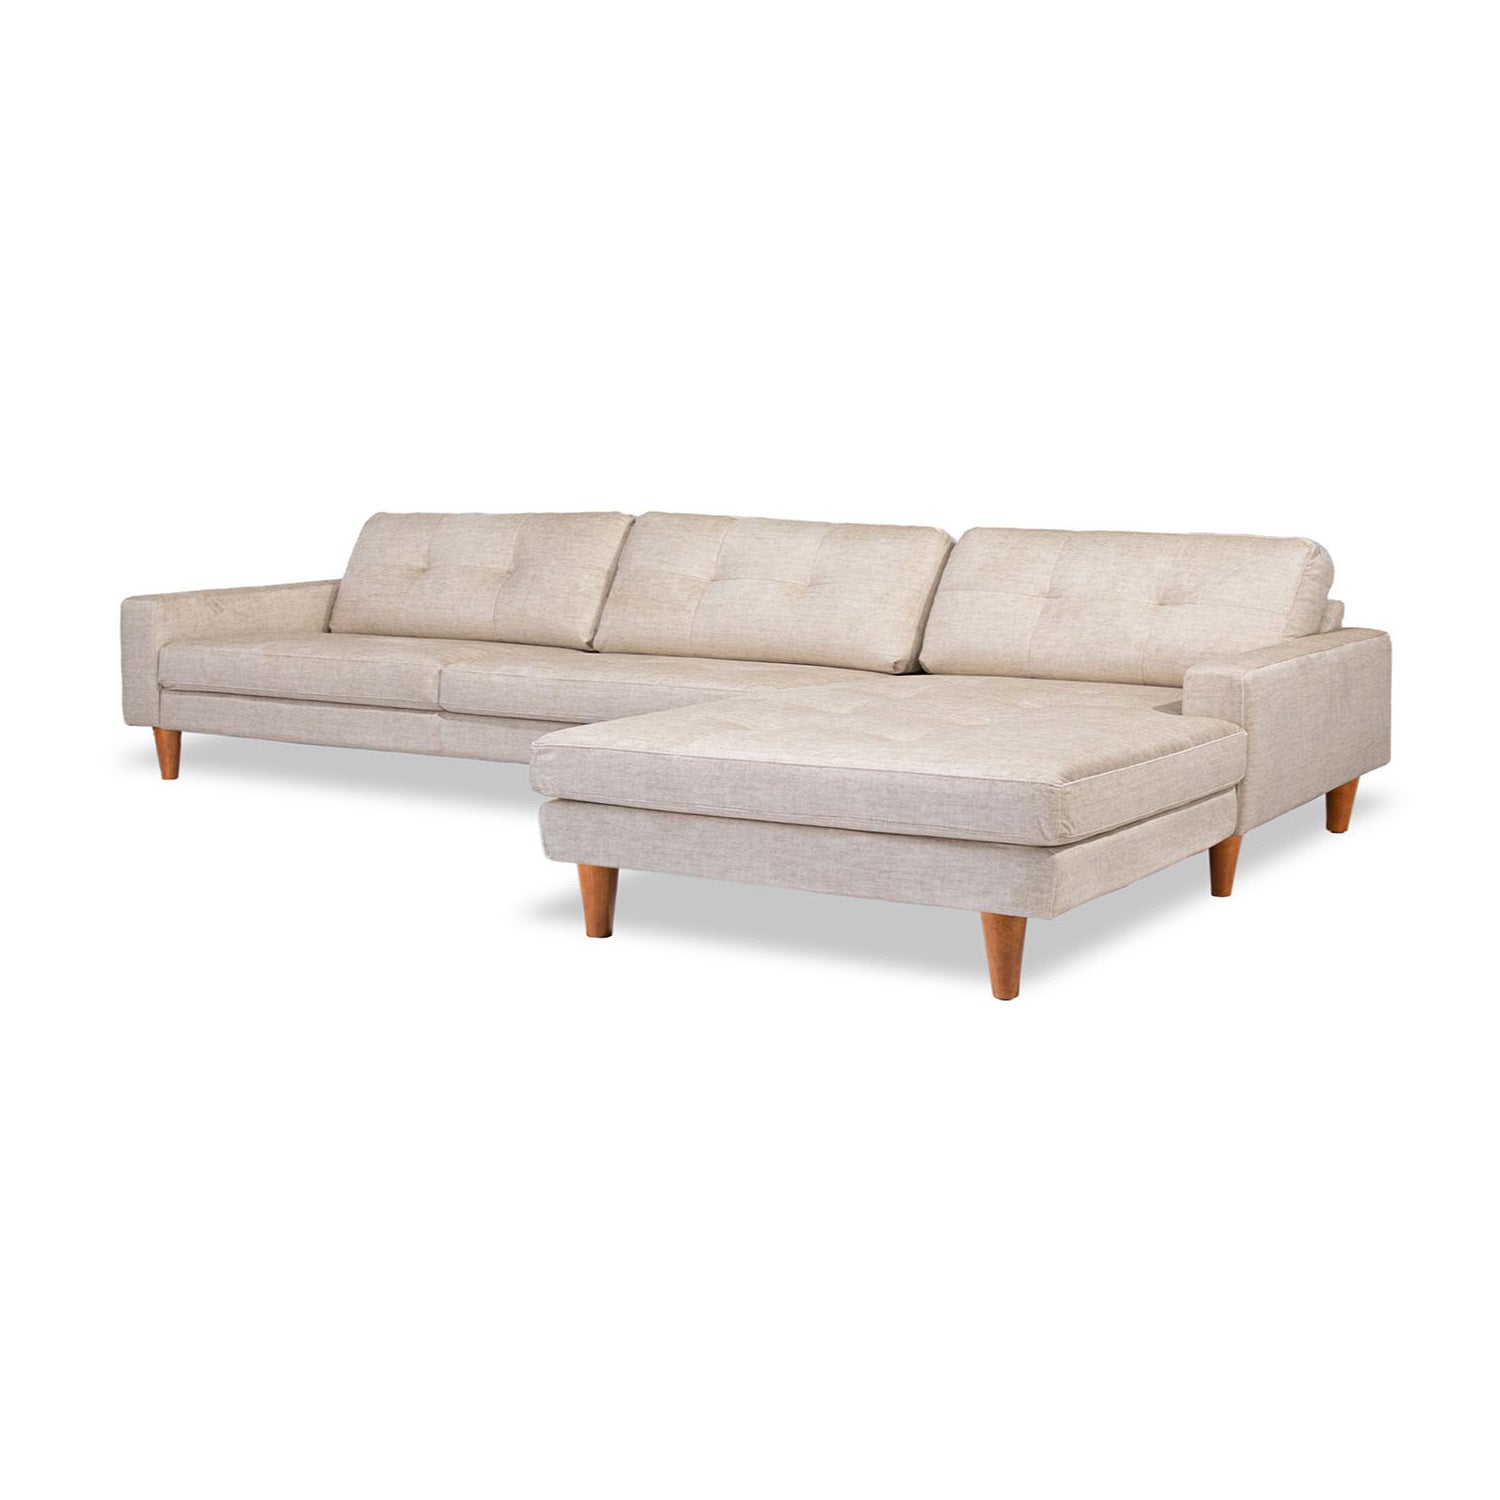 Classic Vogue Velvet Right Side Facing Chaise Lounge